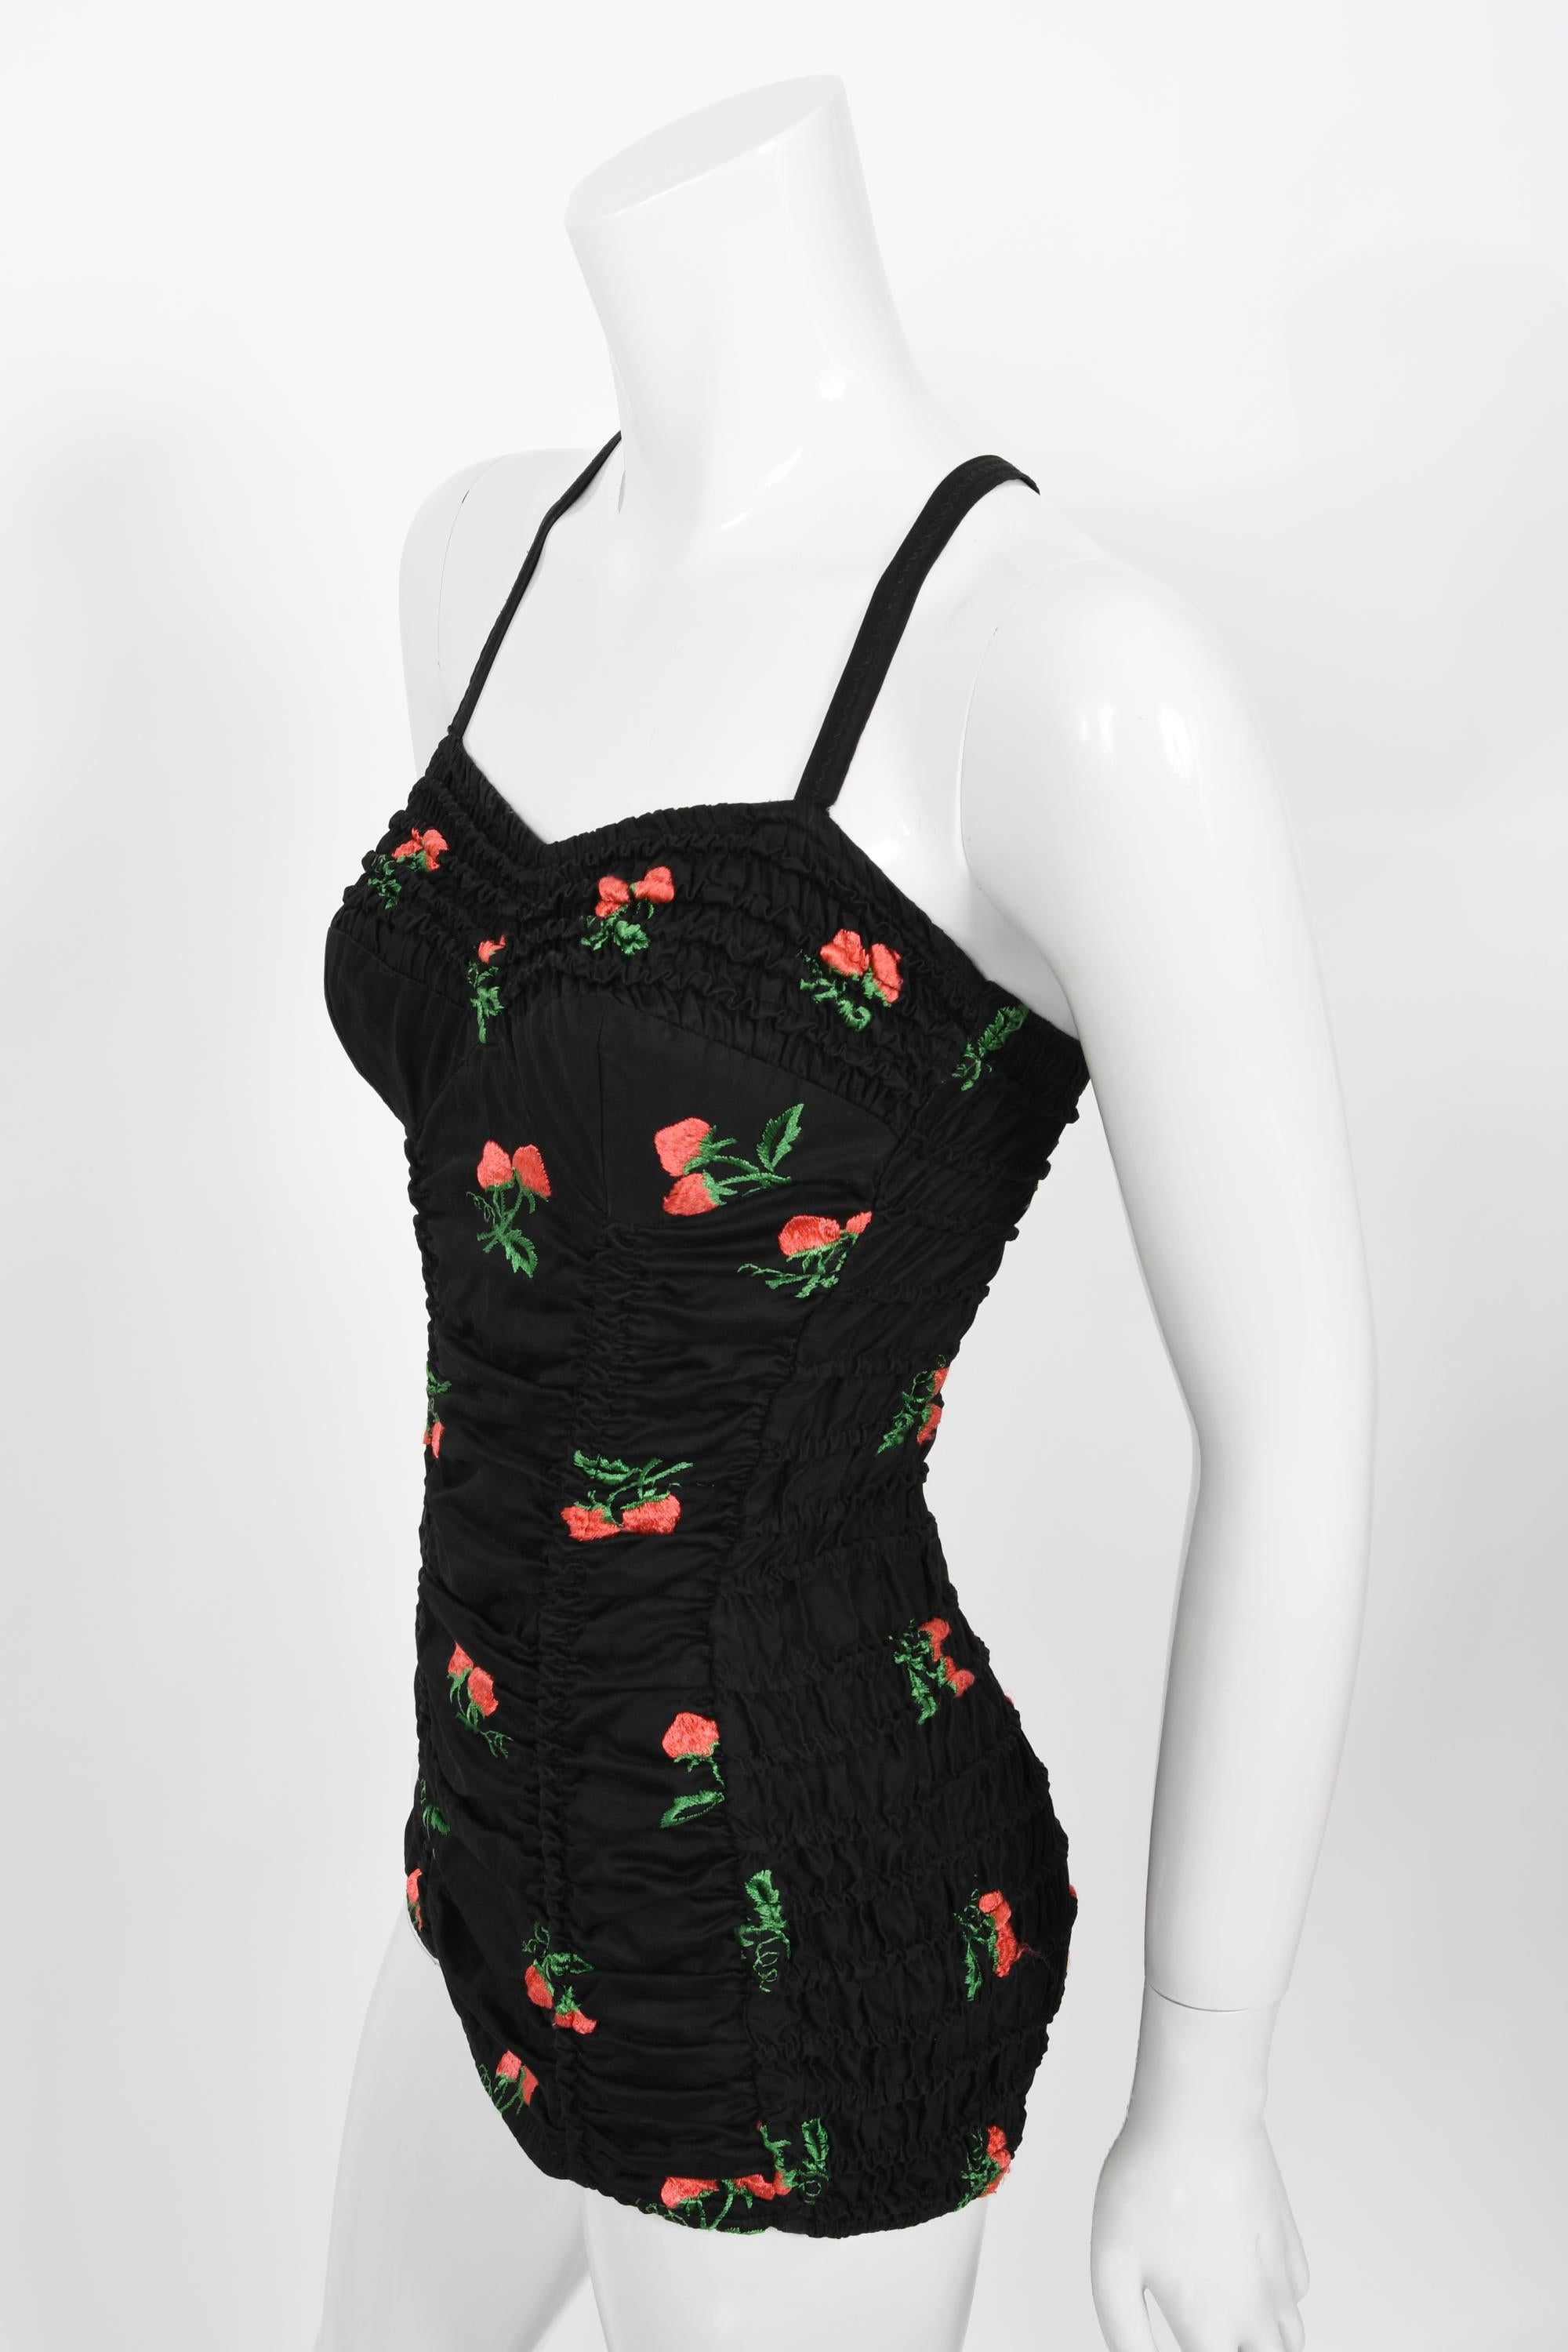 Vintage 1950's Jantzen Embroidered Strawberries Swimsuit & Terry-Cloth Cover Up 5